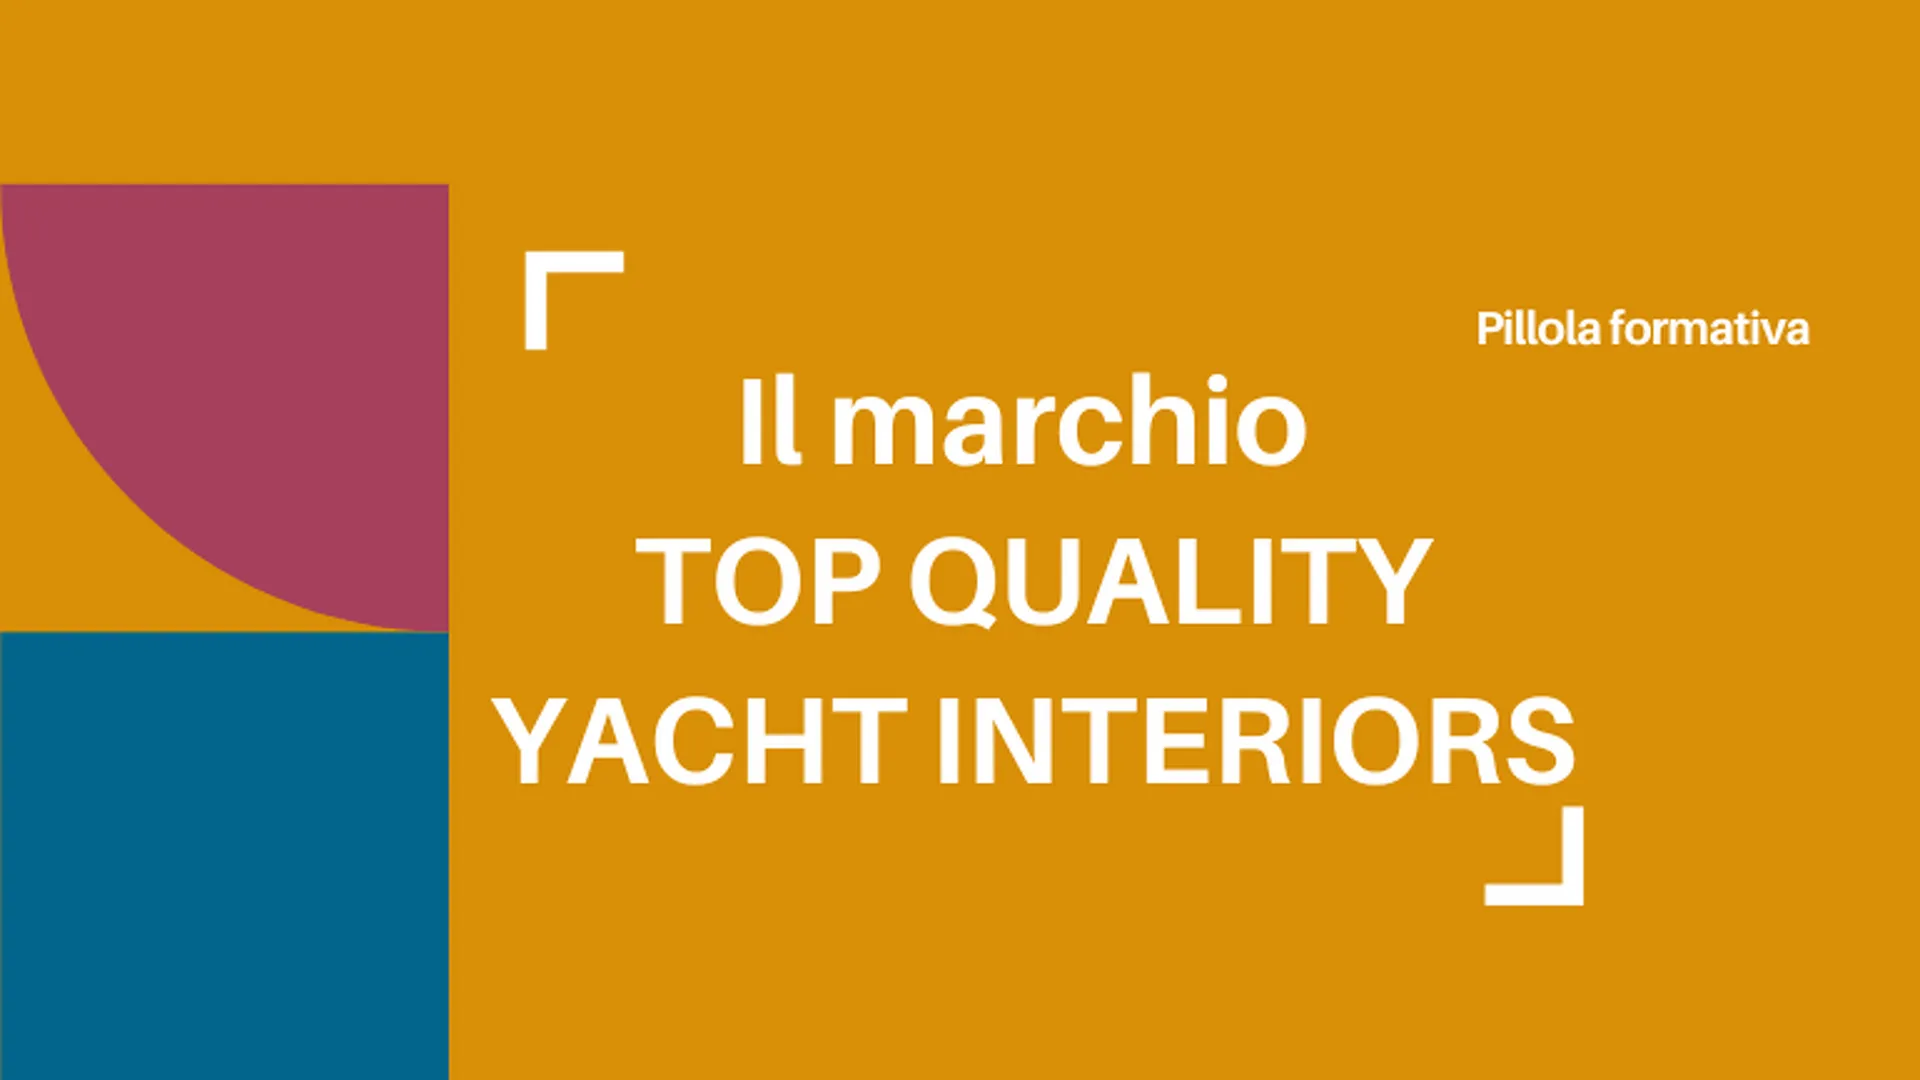 Il marchio TOP QUALITY YACHT INTERIORS